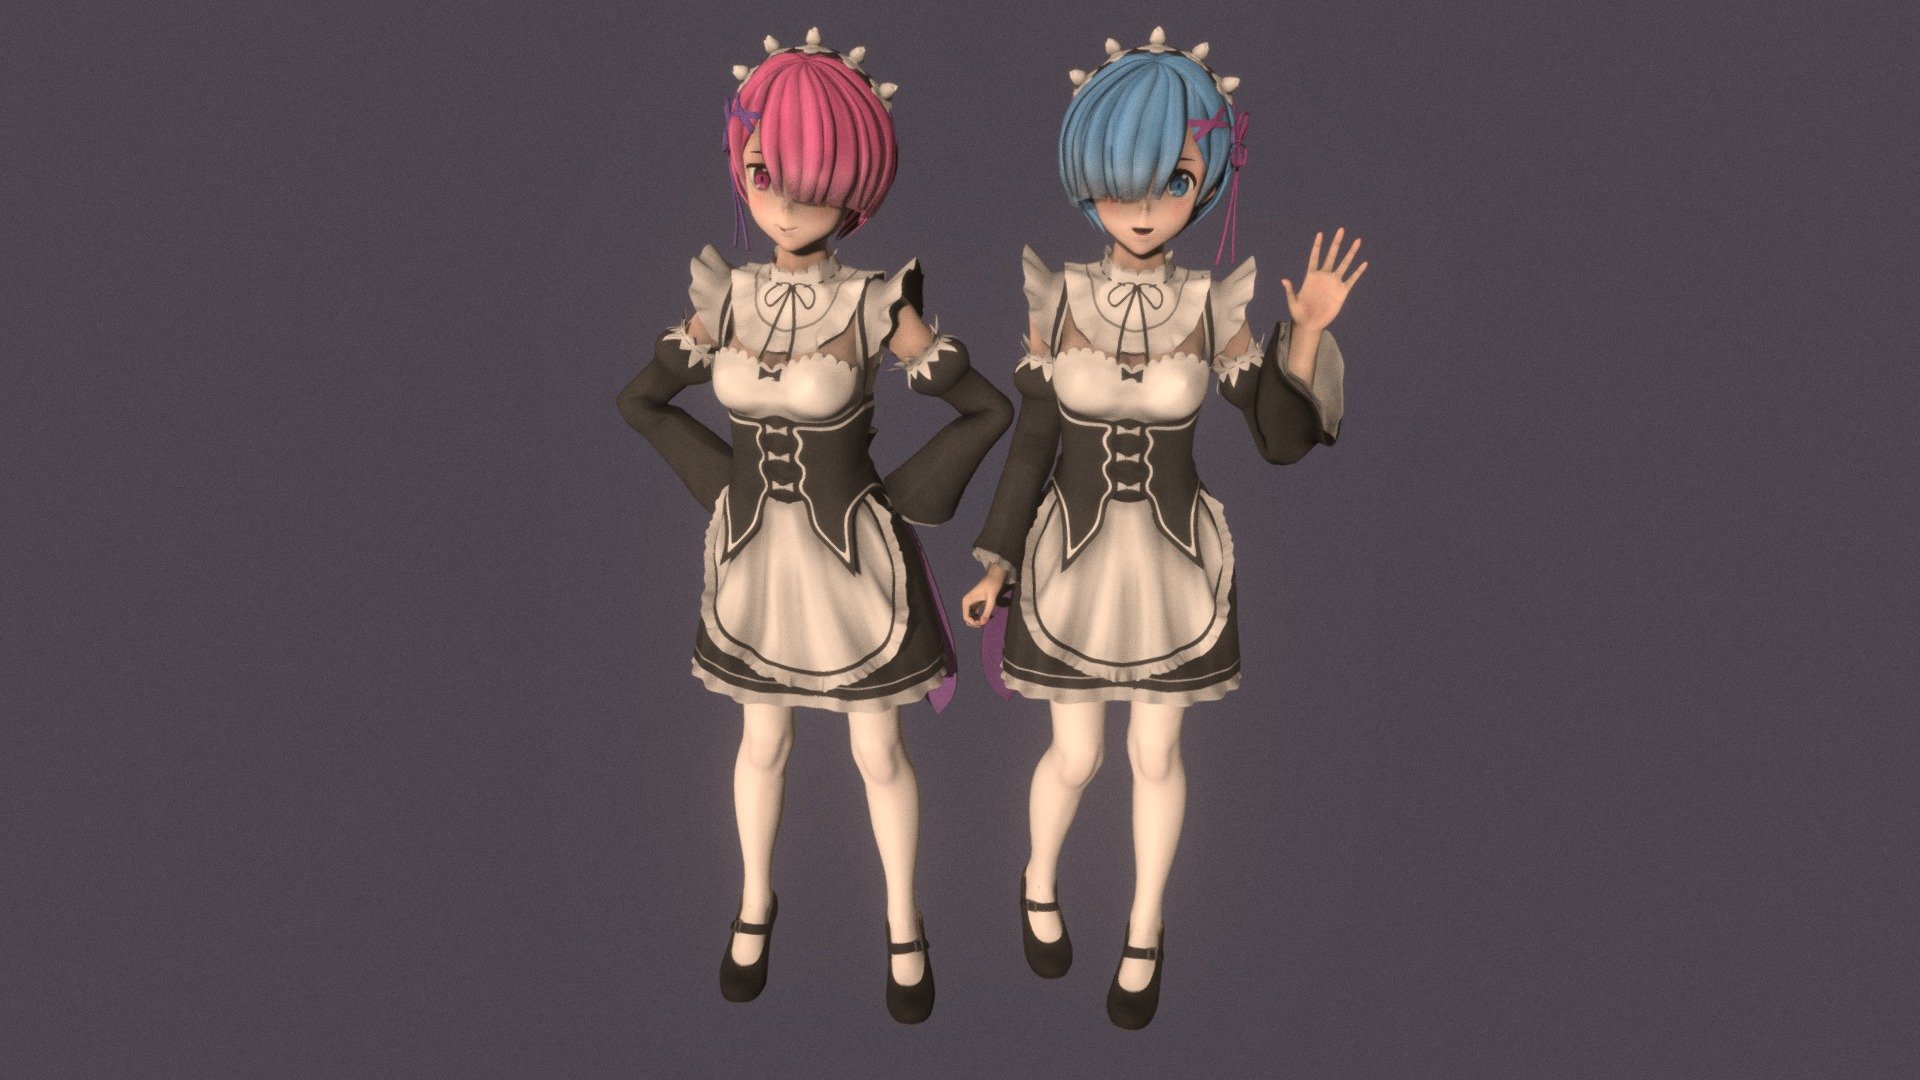 Posed model of anime girl Rem &amp; Ram  (Re:Zero − Starting Life in Another World).

This product include .FBX (ver. 7200) and .MAX (ver. 2010) files.

Rigged version: https://sketchfab.com/3d-models/t-pose-rigged-model-of-rem-ram-60eddabea1d24e978104798dc32ce0fc

I support convert this 3D model to various file formats: 3DS; AI; ASE; DAE; DWF; DWG; DXF; FLT; HTR; IGS; M3G; MQO; OBJ; SAT; STL; W3D; WRL; X.

You can buy all of my models in one pack to save cost: https://sketchfab.com/3d-models/all-of-my-anime-girls-c5a56156994e4193b9e8fa21a3b8360b

And I can make commission models.

If you have any questions, please leave a comment or contact me via my email 3d.eden.project@gmail.com 3d model